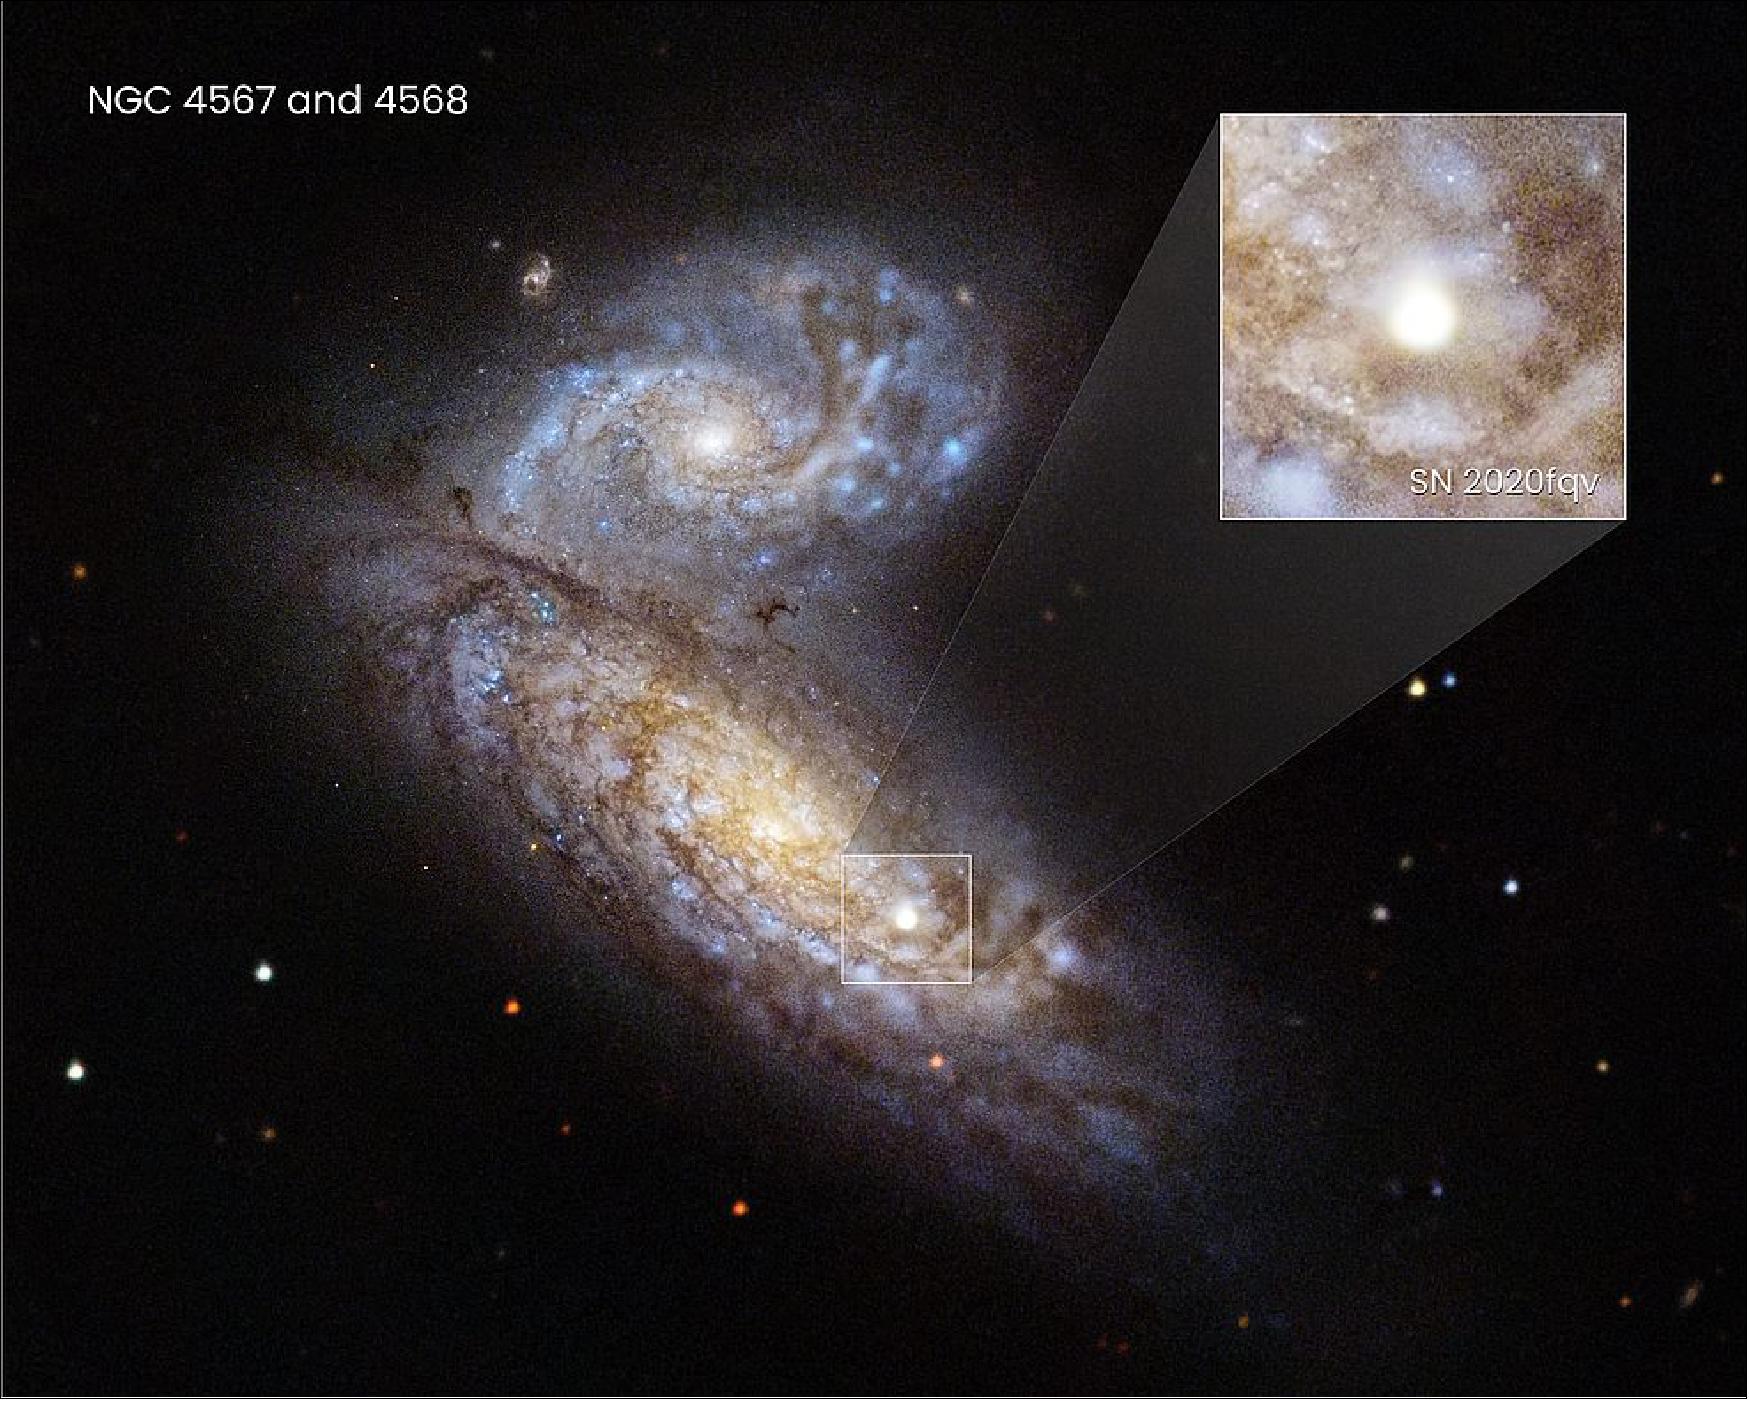 Figure 37: Astronomers recently witnessed supernova SN 2020fqv explode inside the interacting Butterfly galaxies, located about 60 million light-years away in the constellation Virgo. Researchers quickly trained NASA's Hubble Space Telescope on the aftermath. Along with other space- and ground-based telescopes, Hubble delivered a ringside seat to the first moments of the ill-fated star's demise, giving a comprehensive view of a supernova in the very earliest stage of exploding. Hubble probed the material very close to the supernova that was ejected by the star in the last year of its life. These observations allowed researchers to understand what was happening to the star just before it died, and may provide astronomers with an early warning system for other stars on the brink of death [image credits: NASA, ESA, Ryan Foley (UC Santa Cruz); Image Processing: Joseph DePasquale (STScI)]